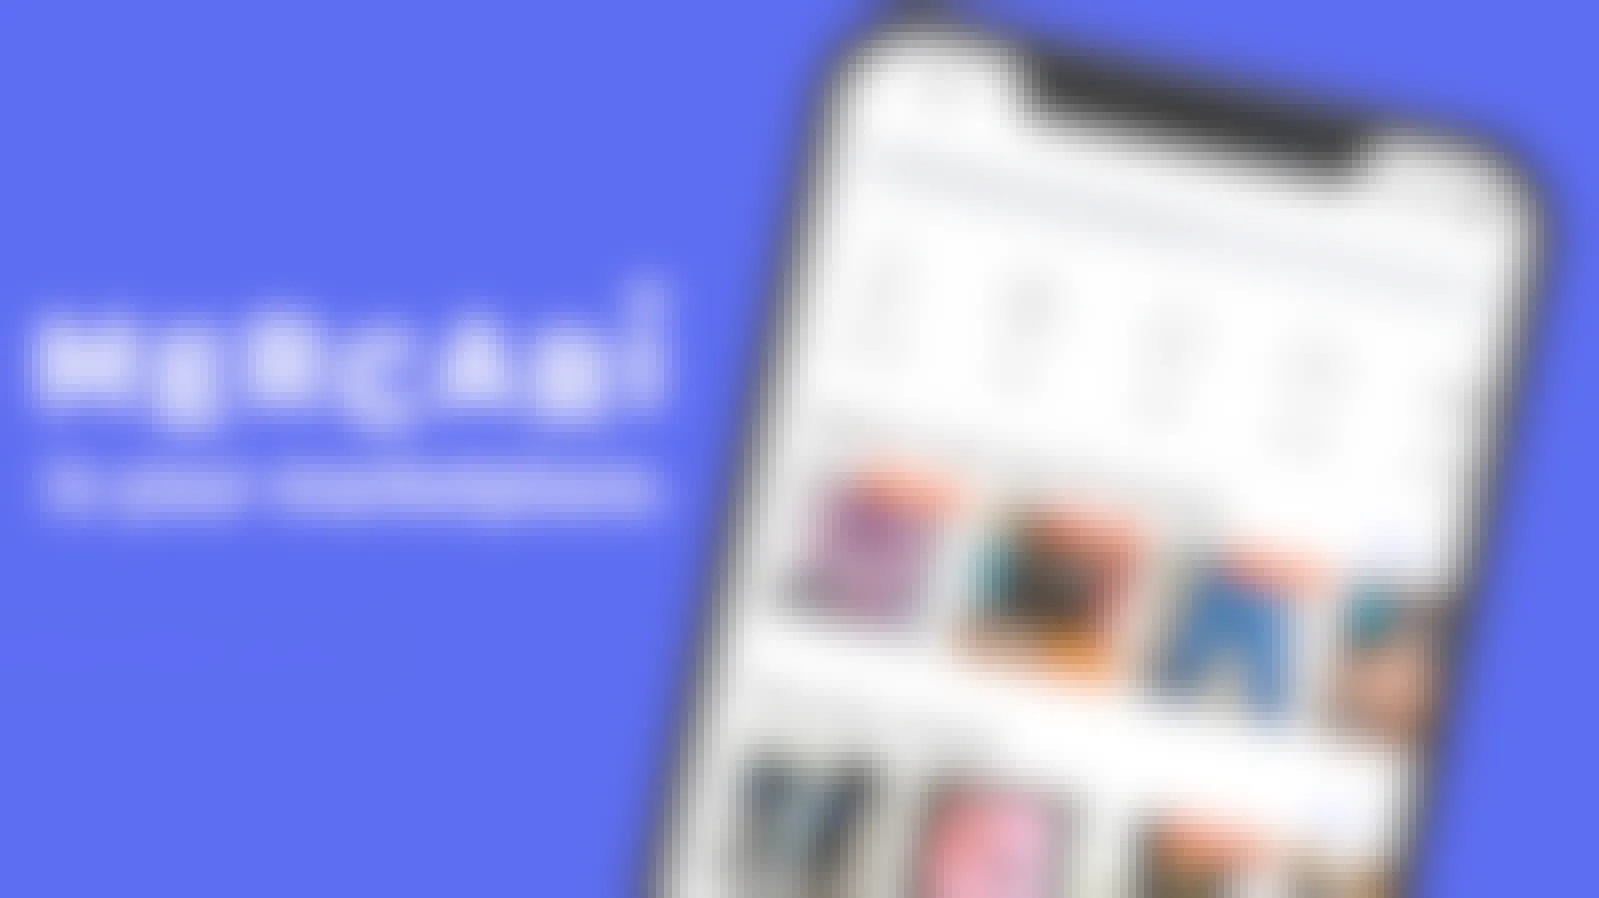 A graphic of a phone displaying the Mercari app on a purple background with the text "Mercari is your marketplace